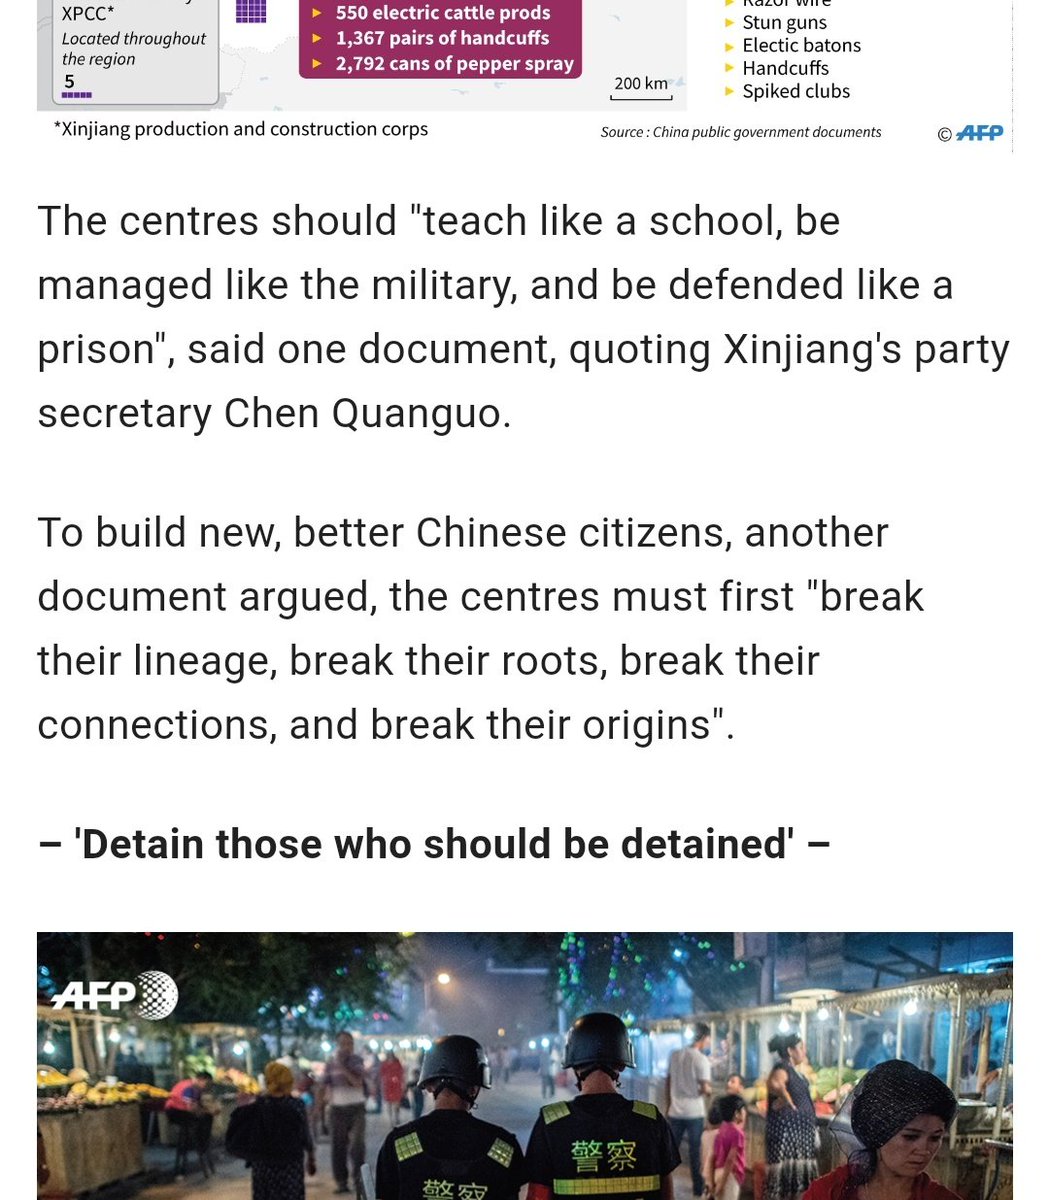 The "Break their lineages" statement to be originating from a Han official isn't even warrented by the soure Roberts cited in his book. So where did he get that from? https://www.afp.com/en/inside-chinas-internment-camps-tear-gas-tasers-and-textbooks